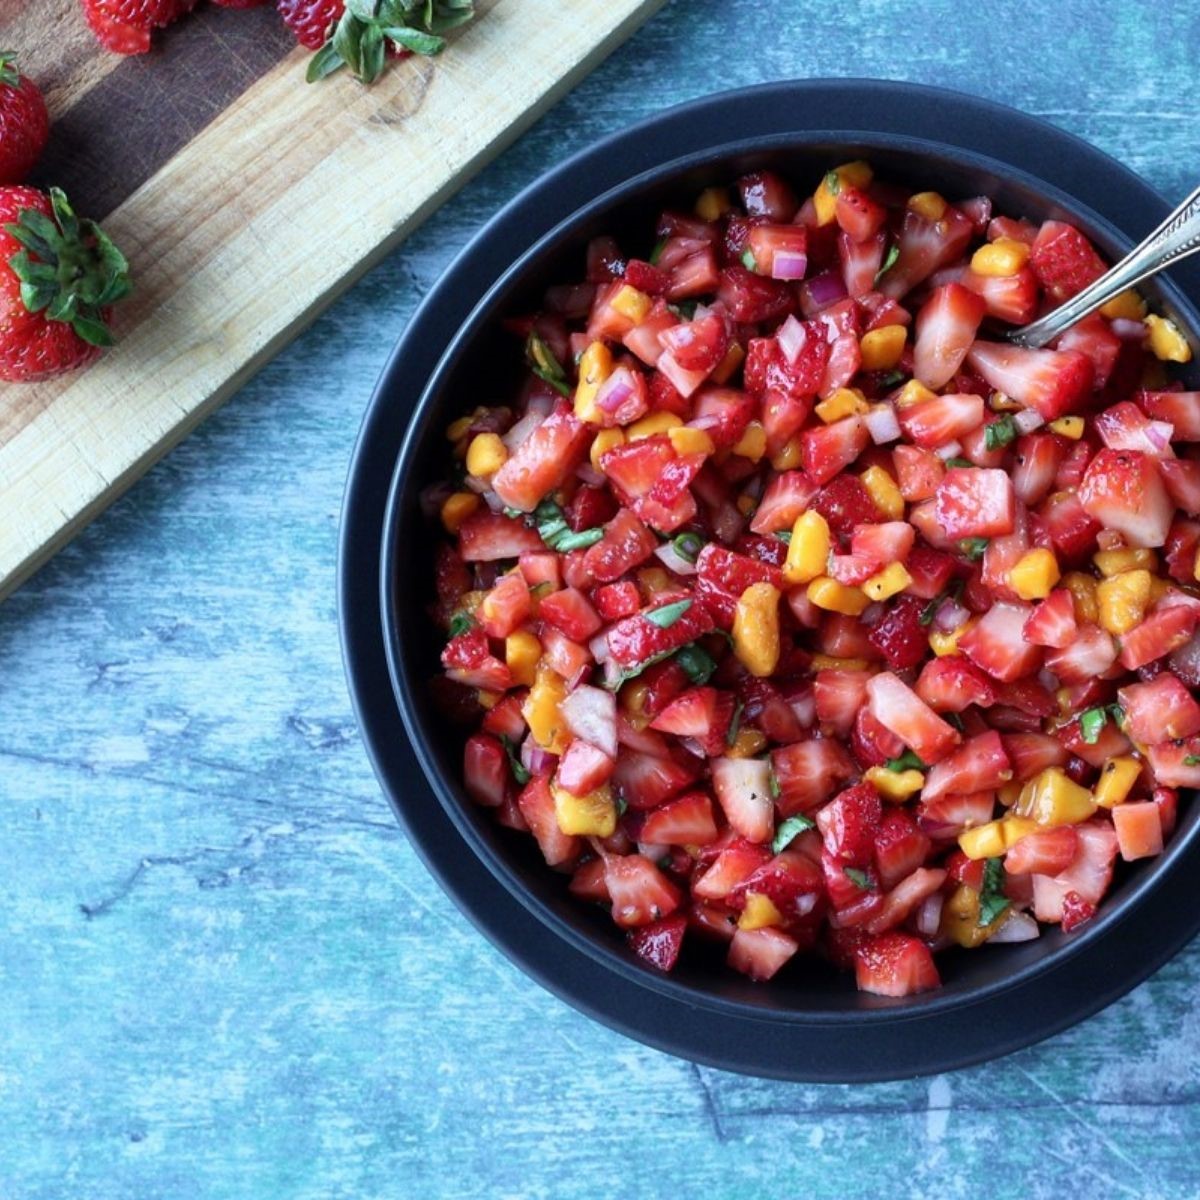 Diced strawberries, onions, and mango as a salsa in a black bowl